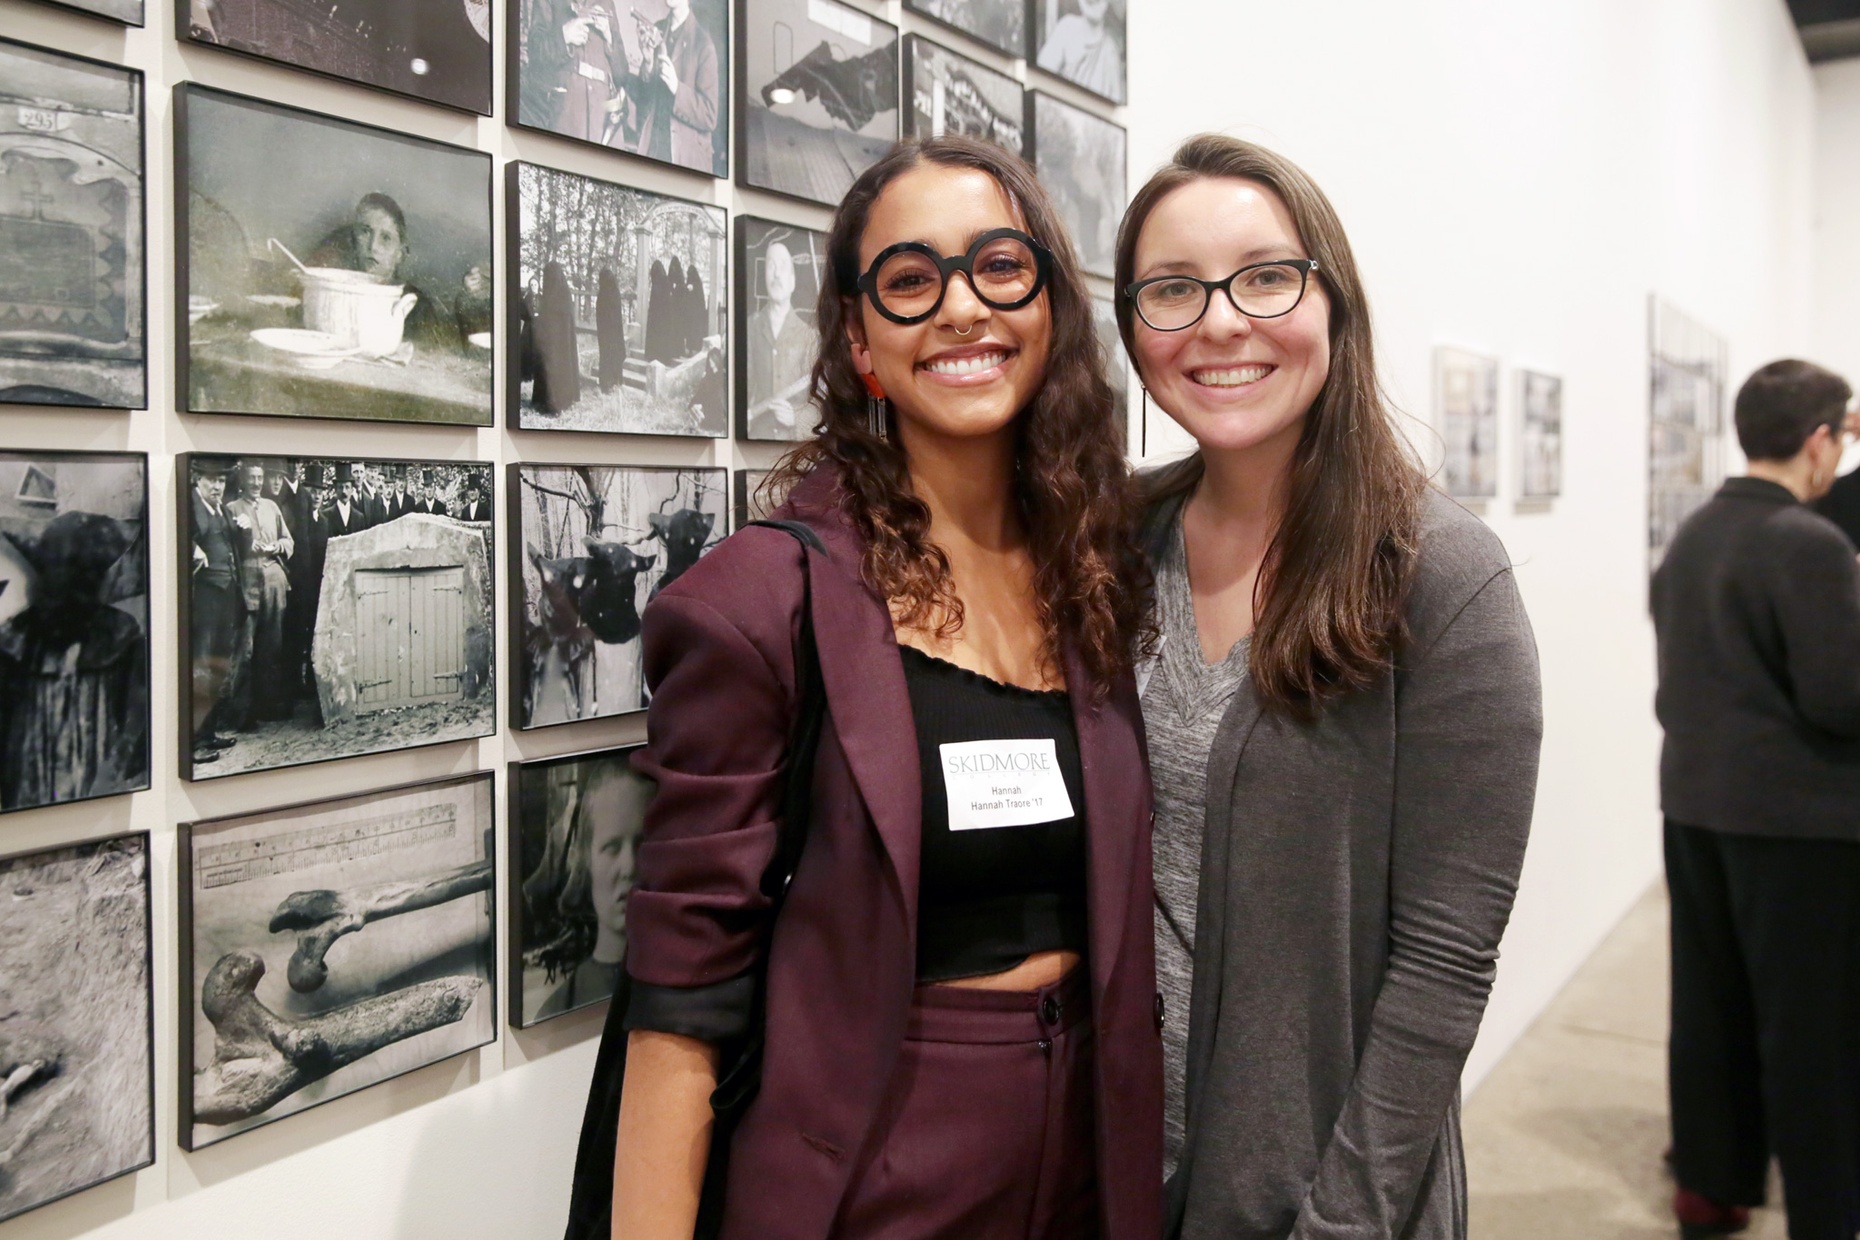 Two young women, one light-skinned and one dark-skinned, stand next to each other smiling in front of a wall with black and white photographs.